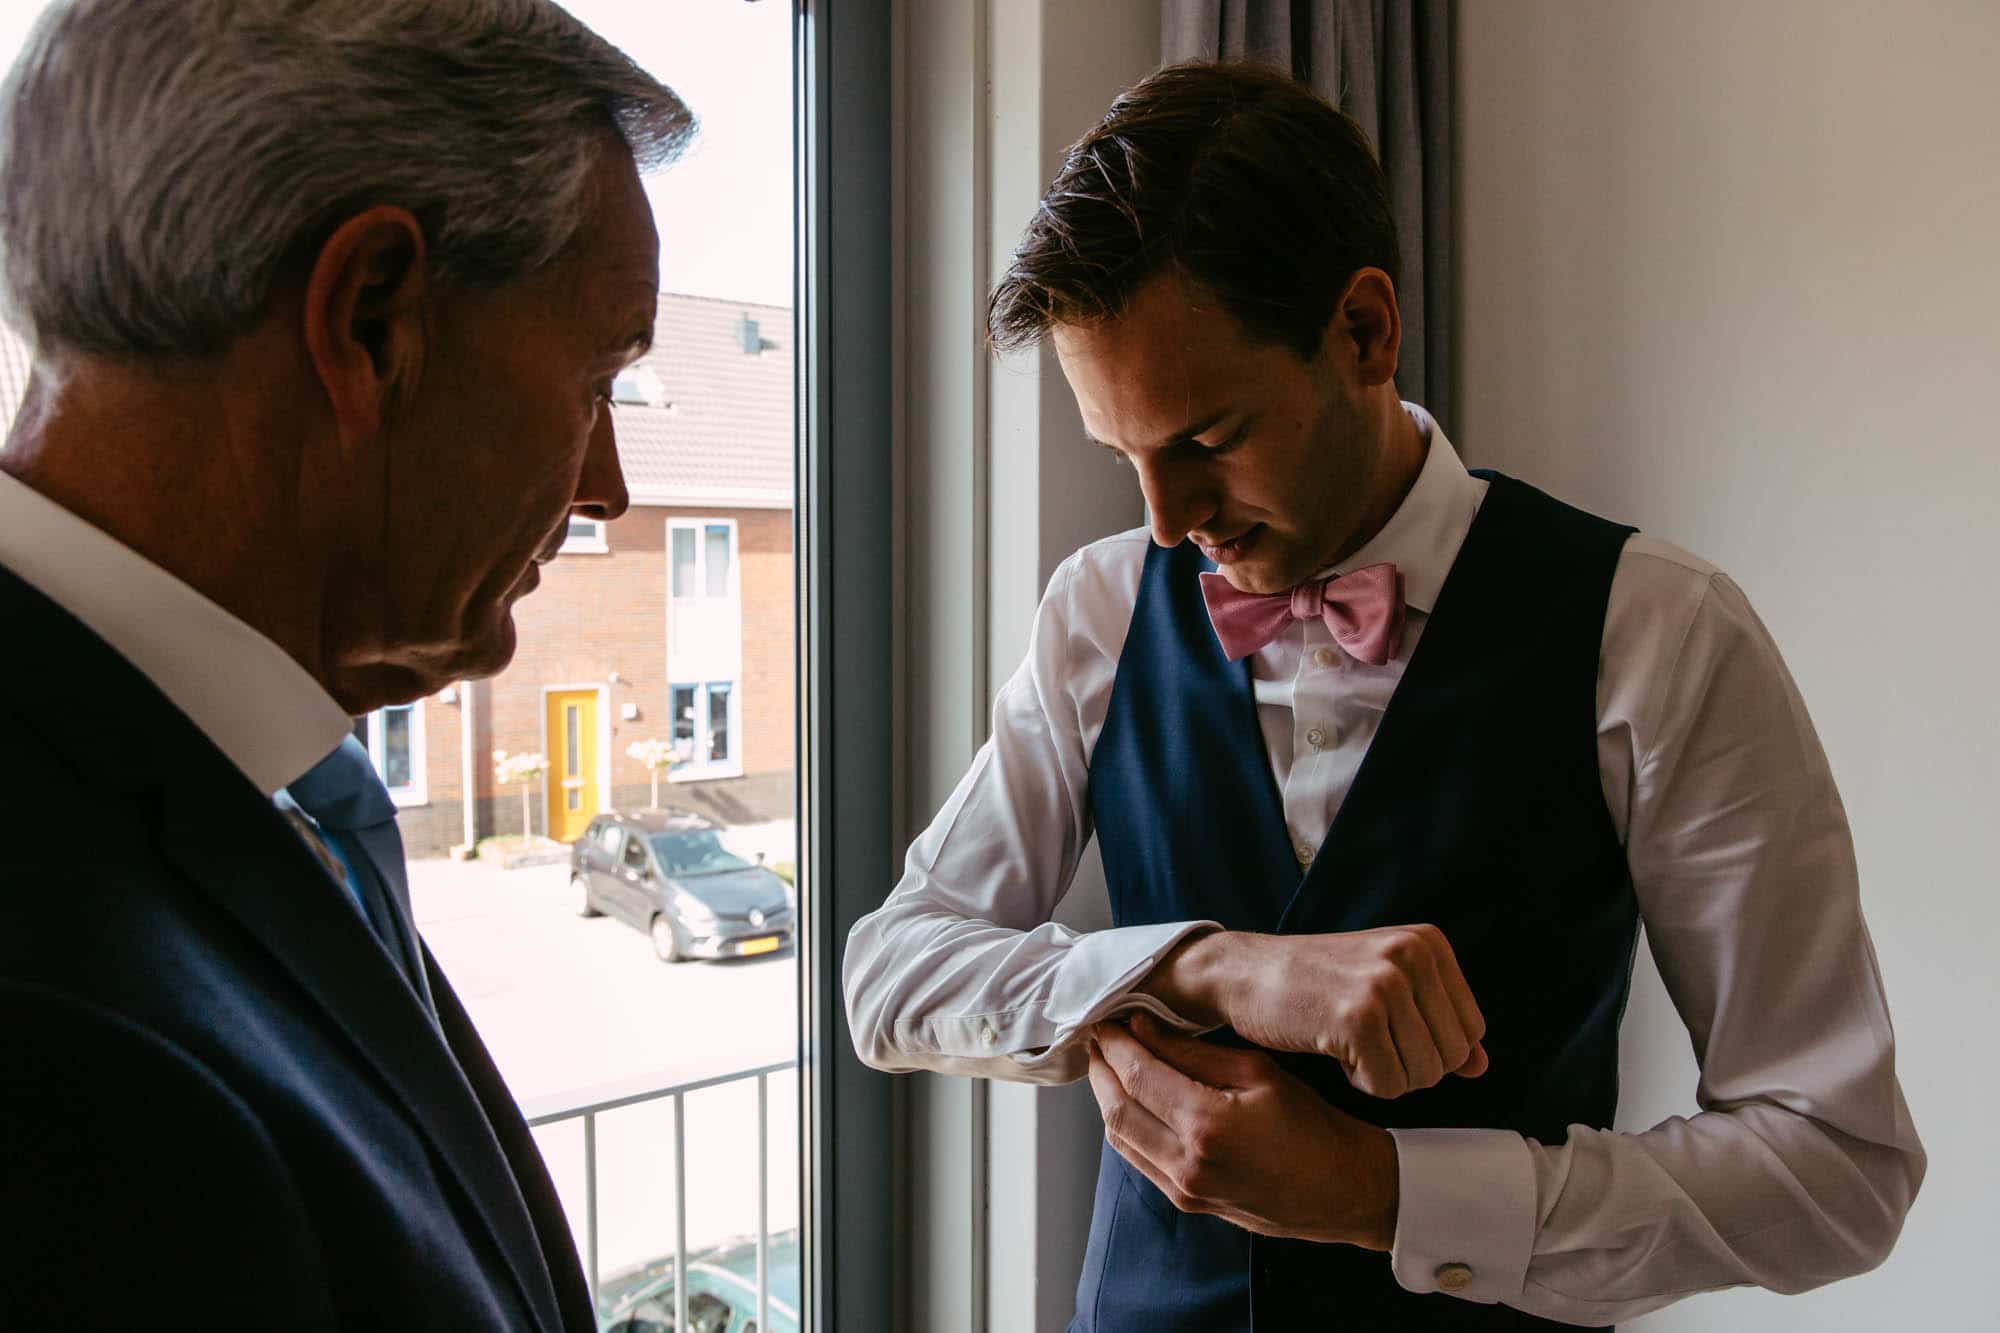 A man in a suit adjusts his watch.